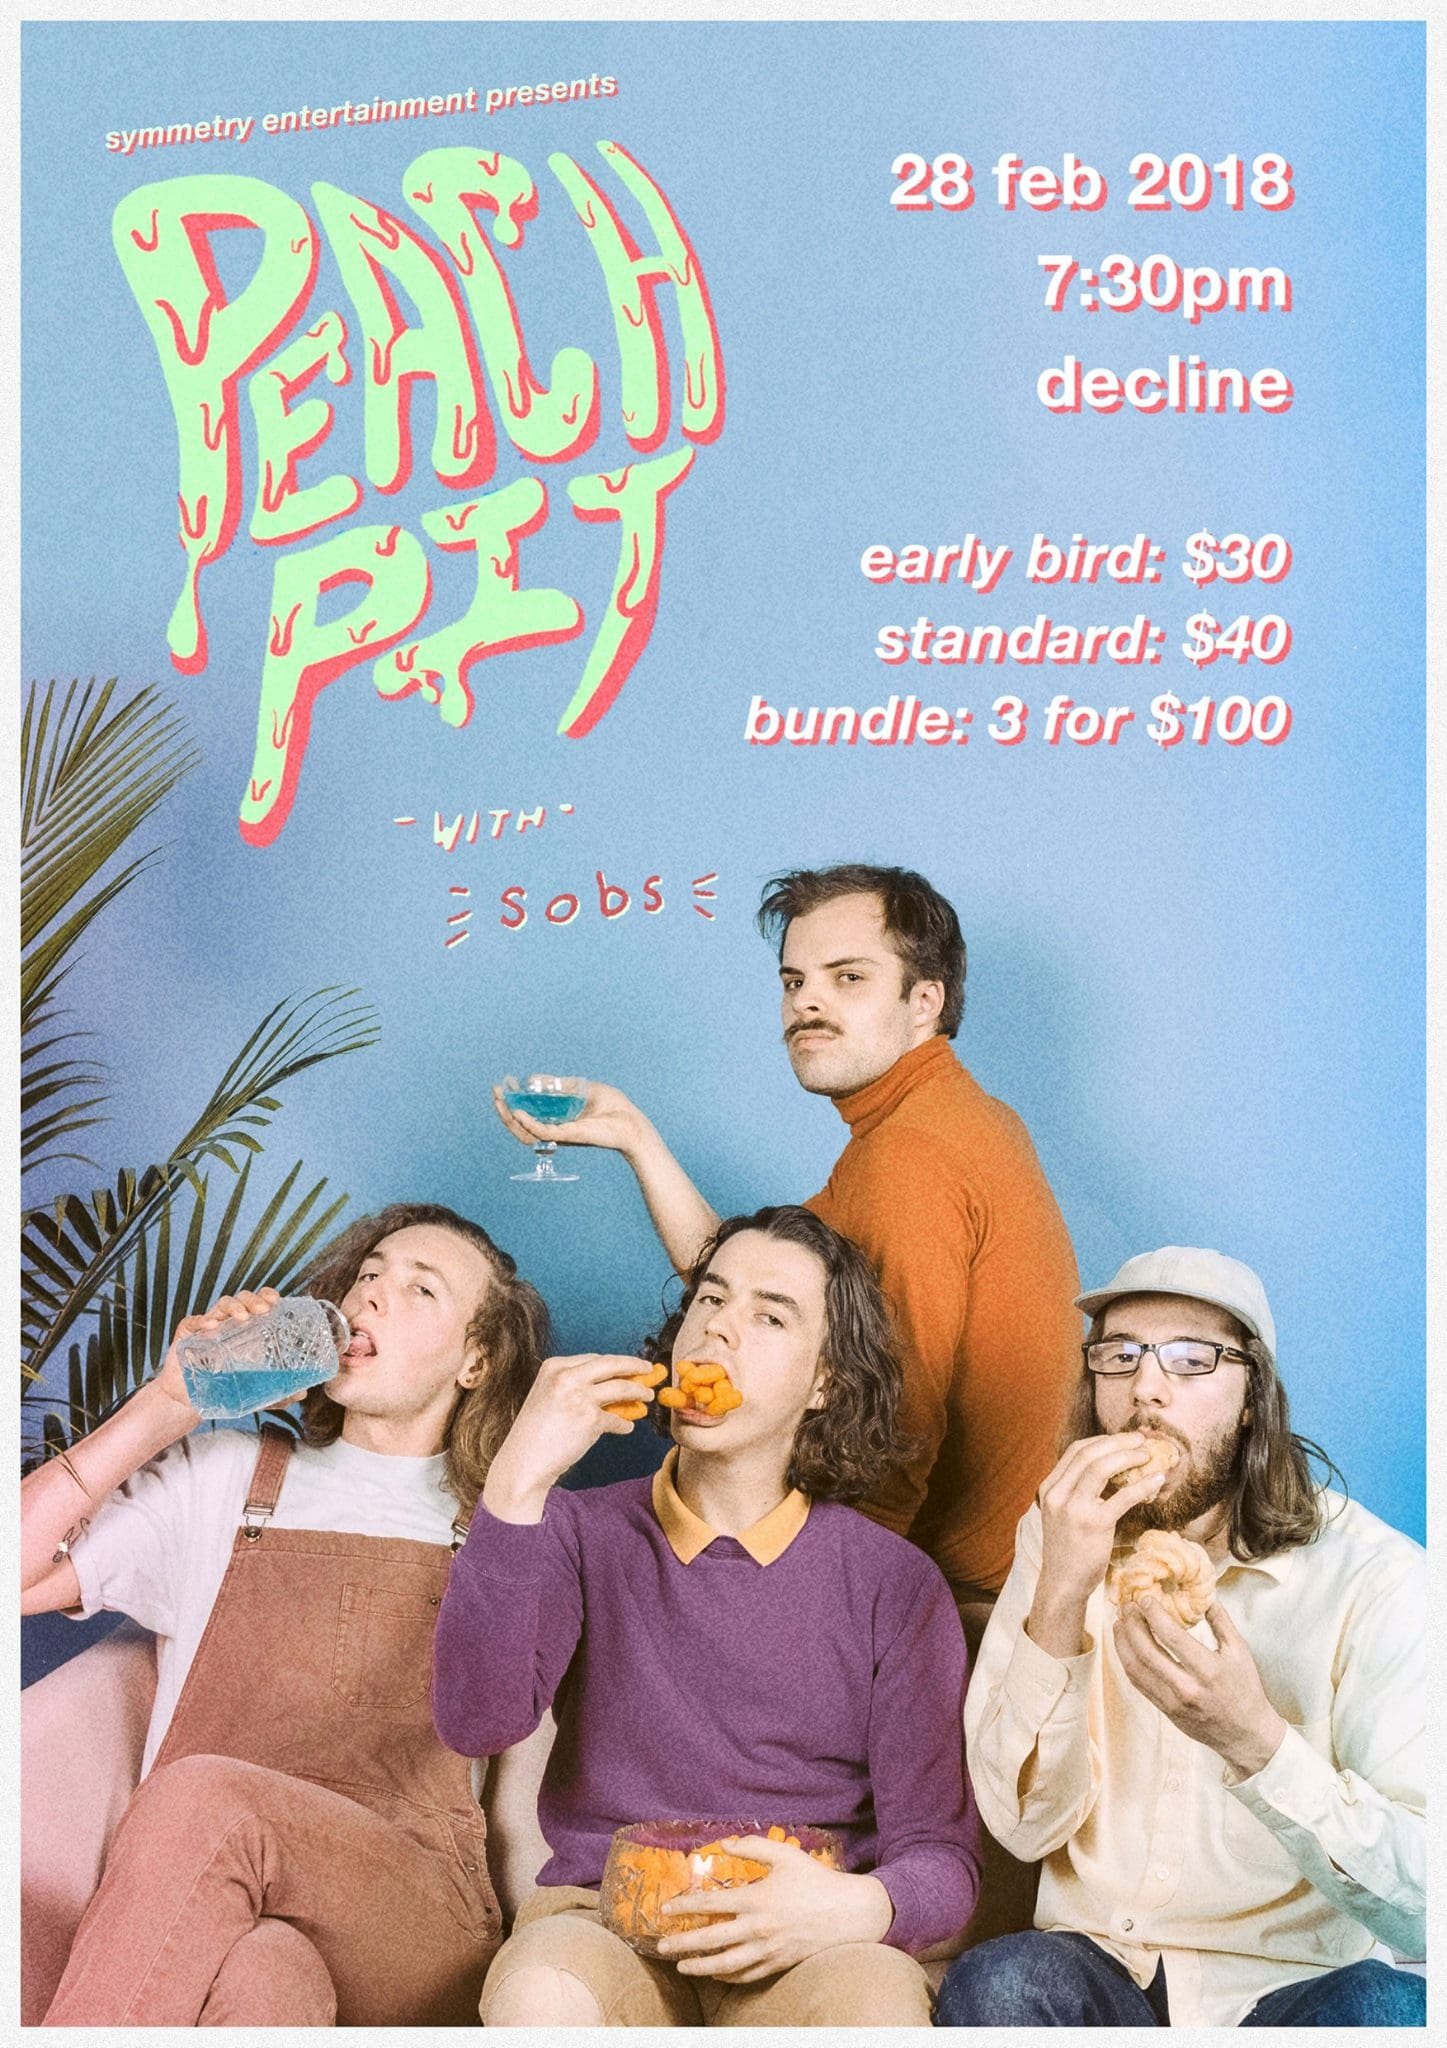 Indie pop band Peach Pit to perform in Singapore and Bangkok